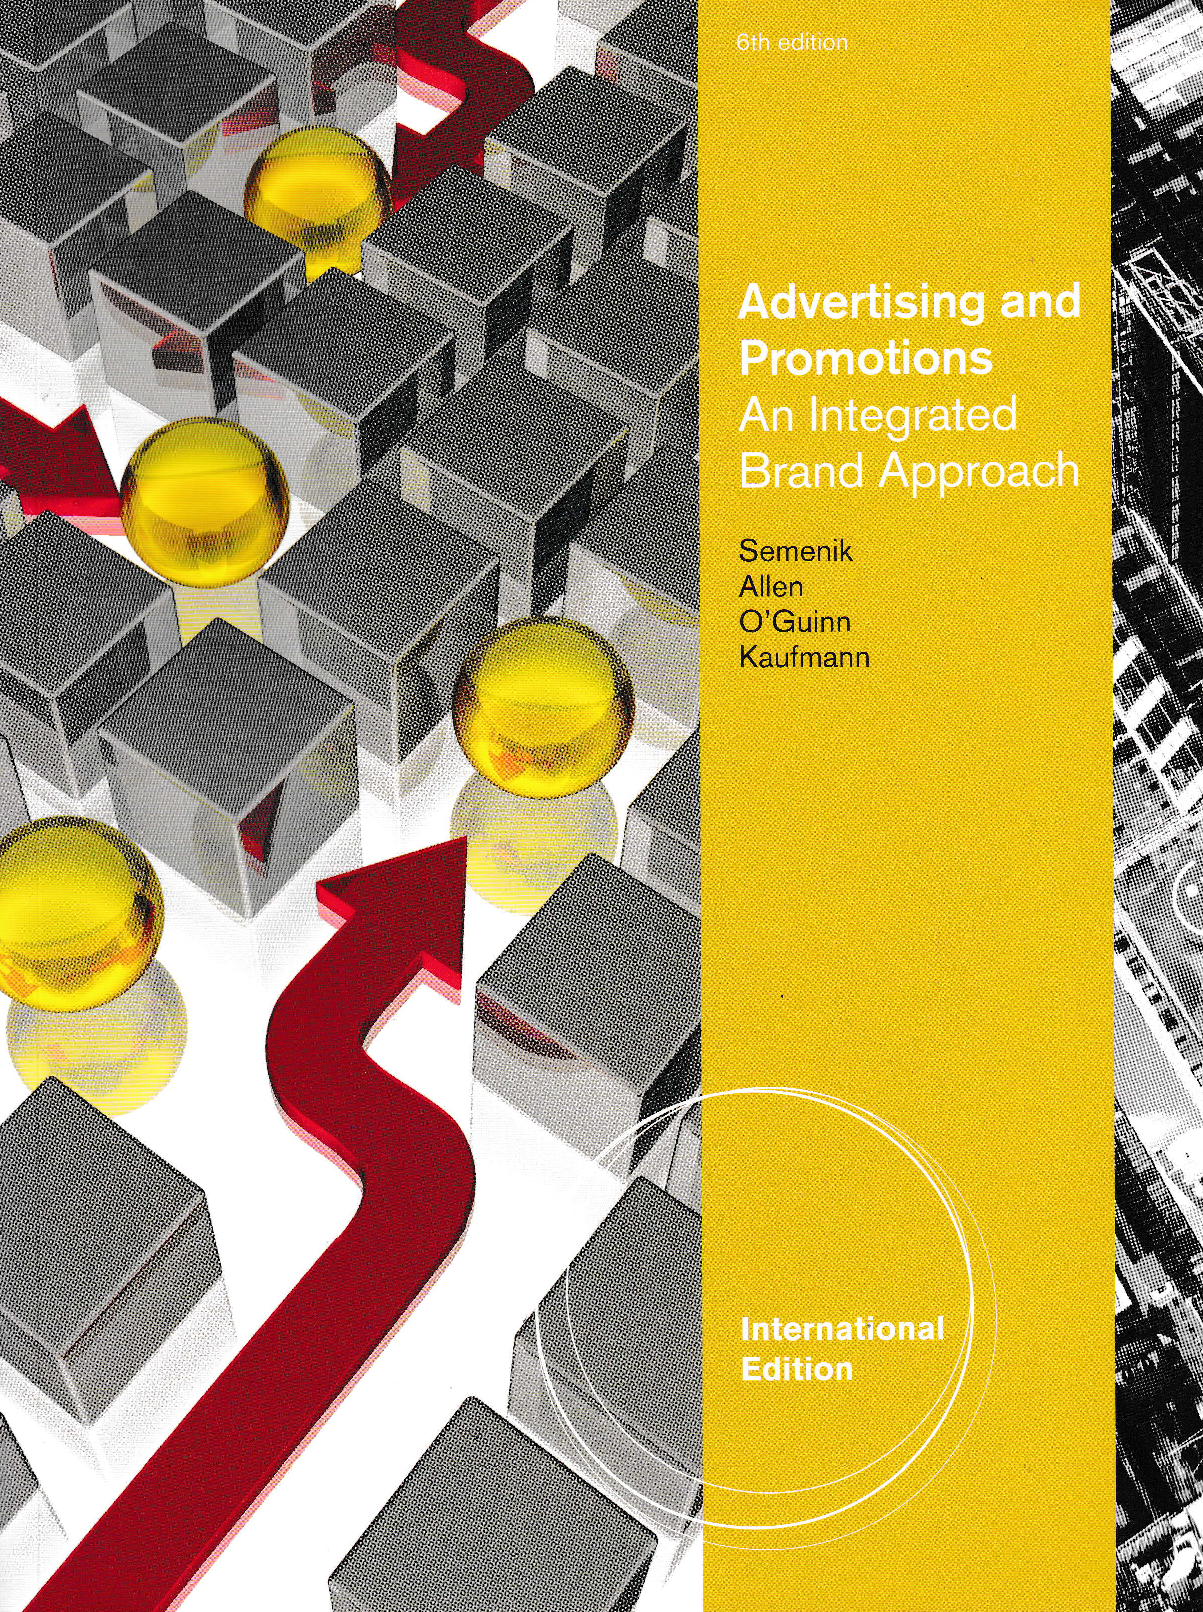 ADVERTISING AND PROMOTIONS AN INTEGRATED BRAND APPROACH